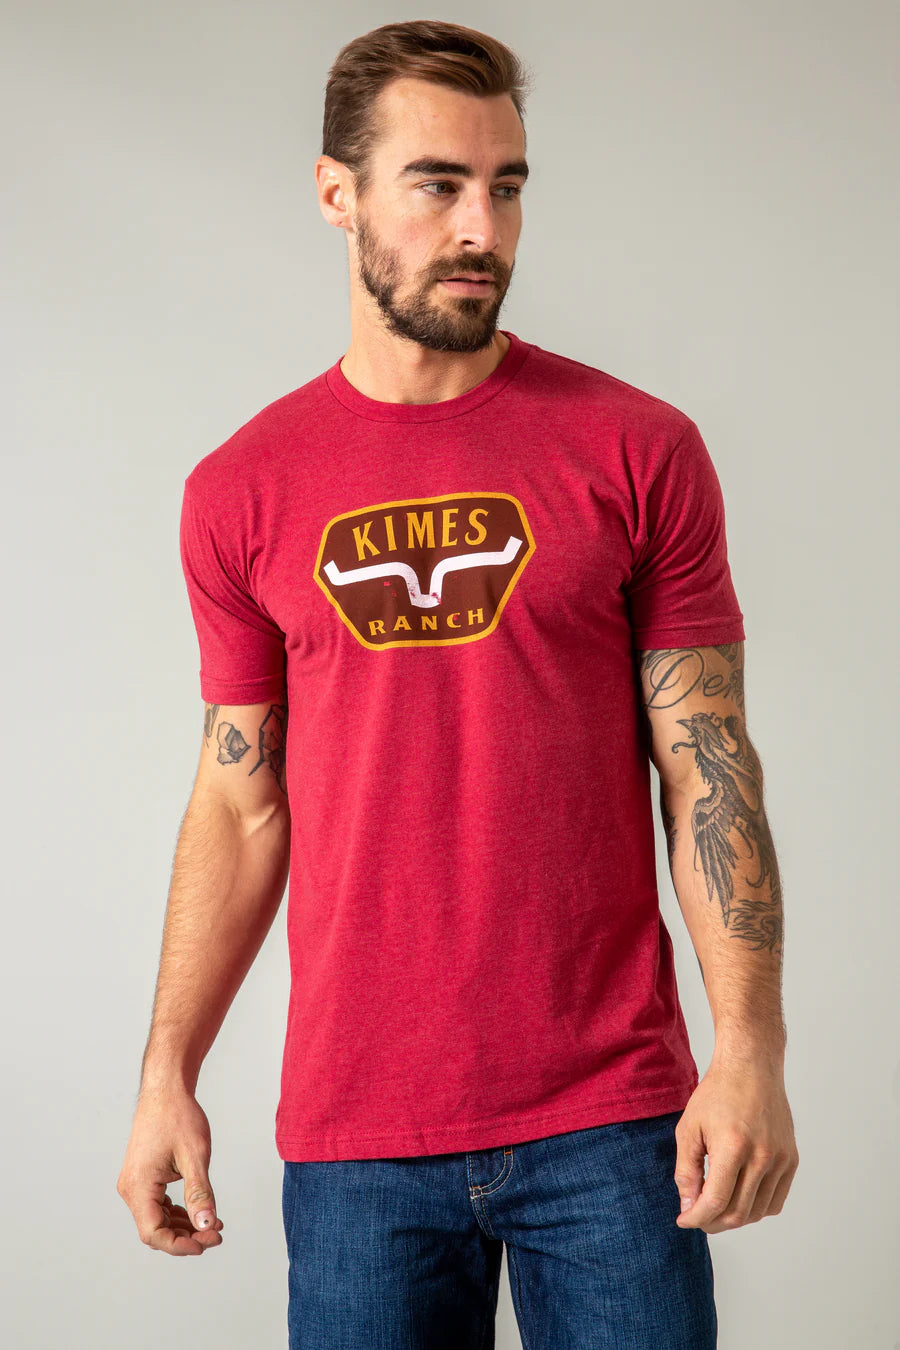 Kimes Ranch The Distance Graphic T-Shirt in Cardinal Red